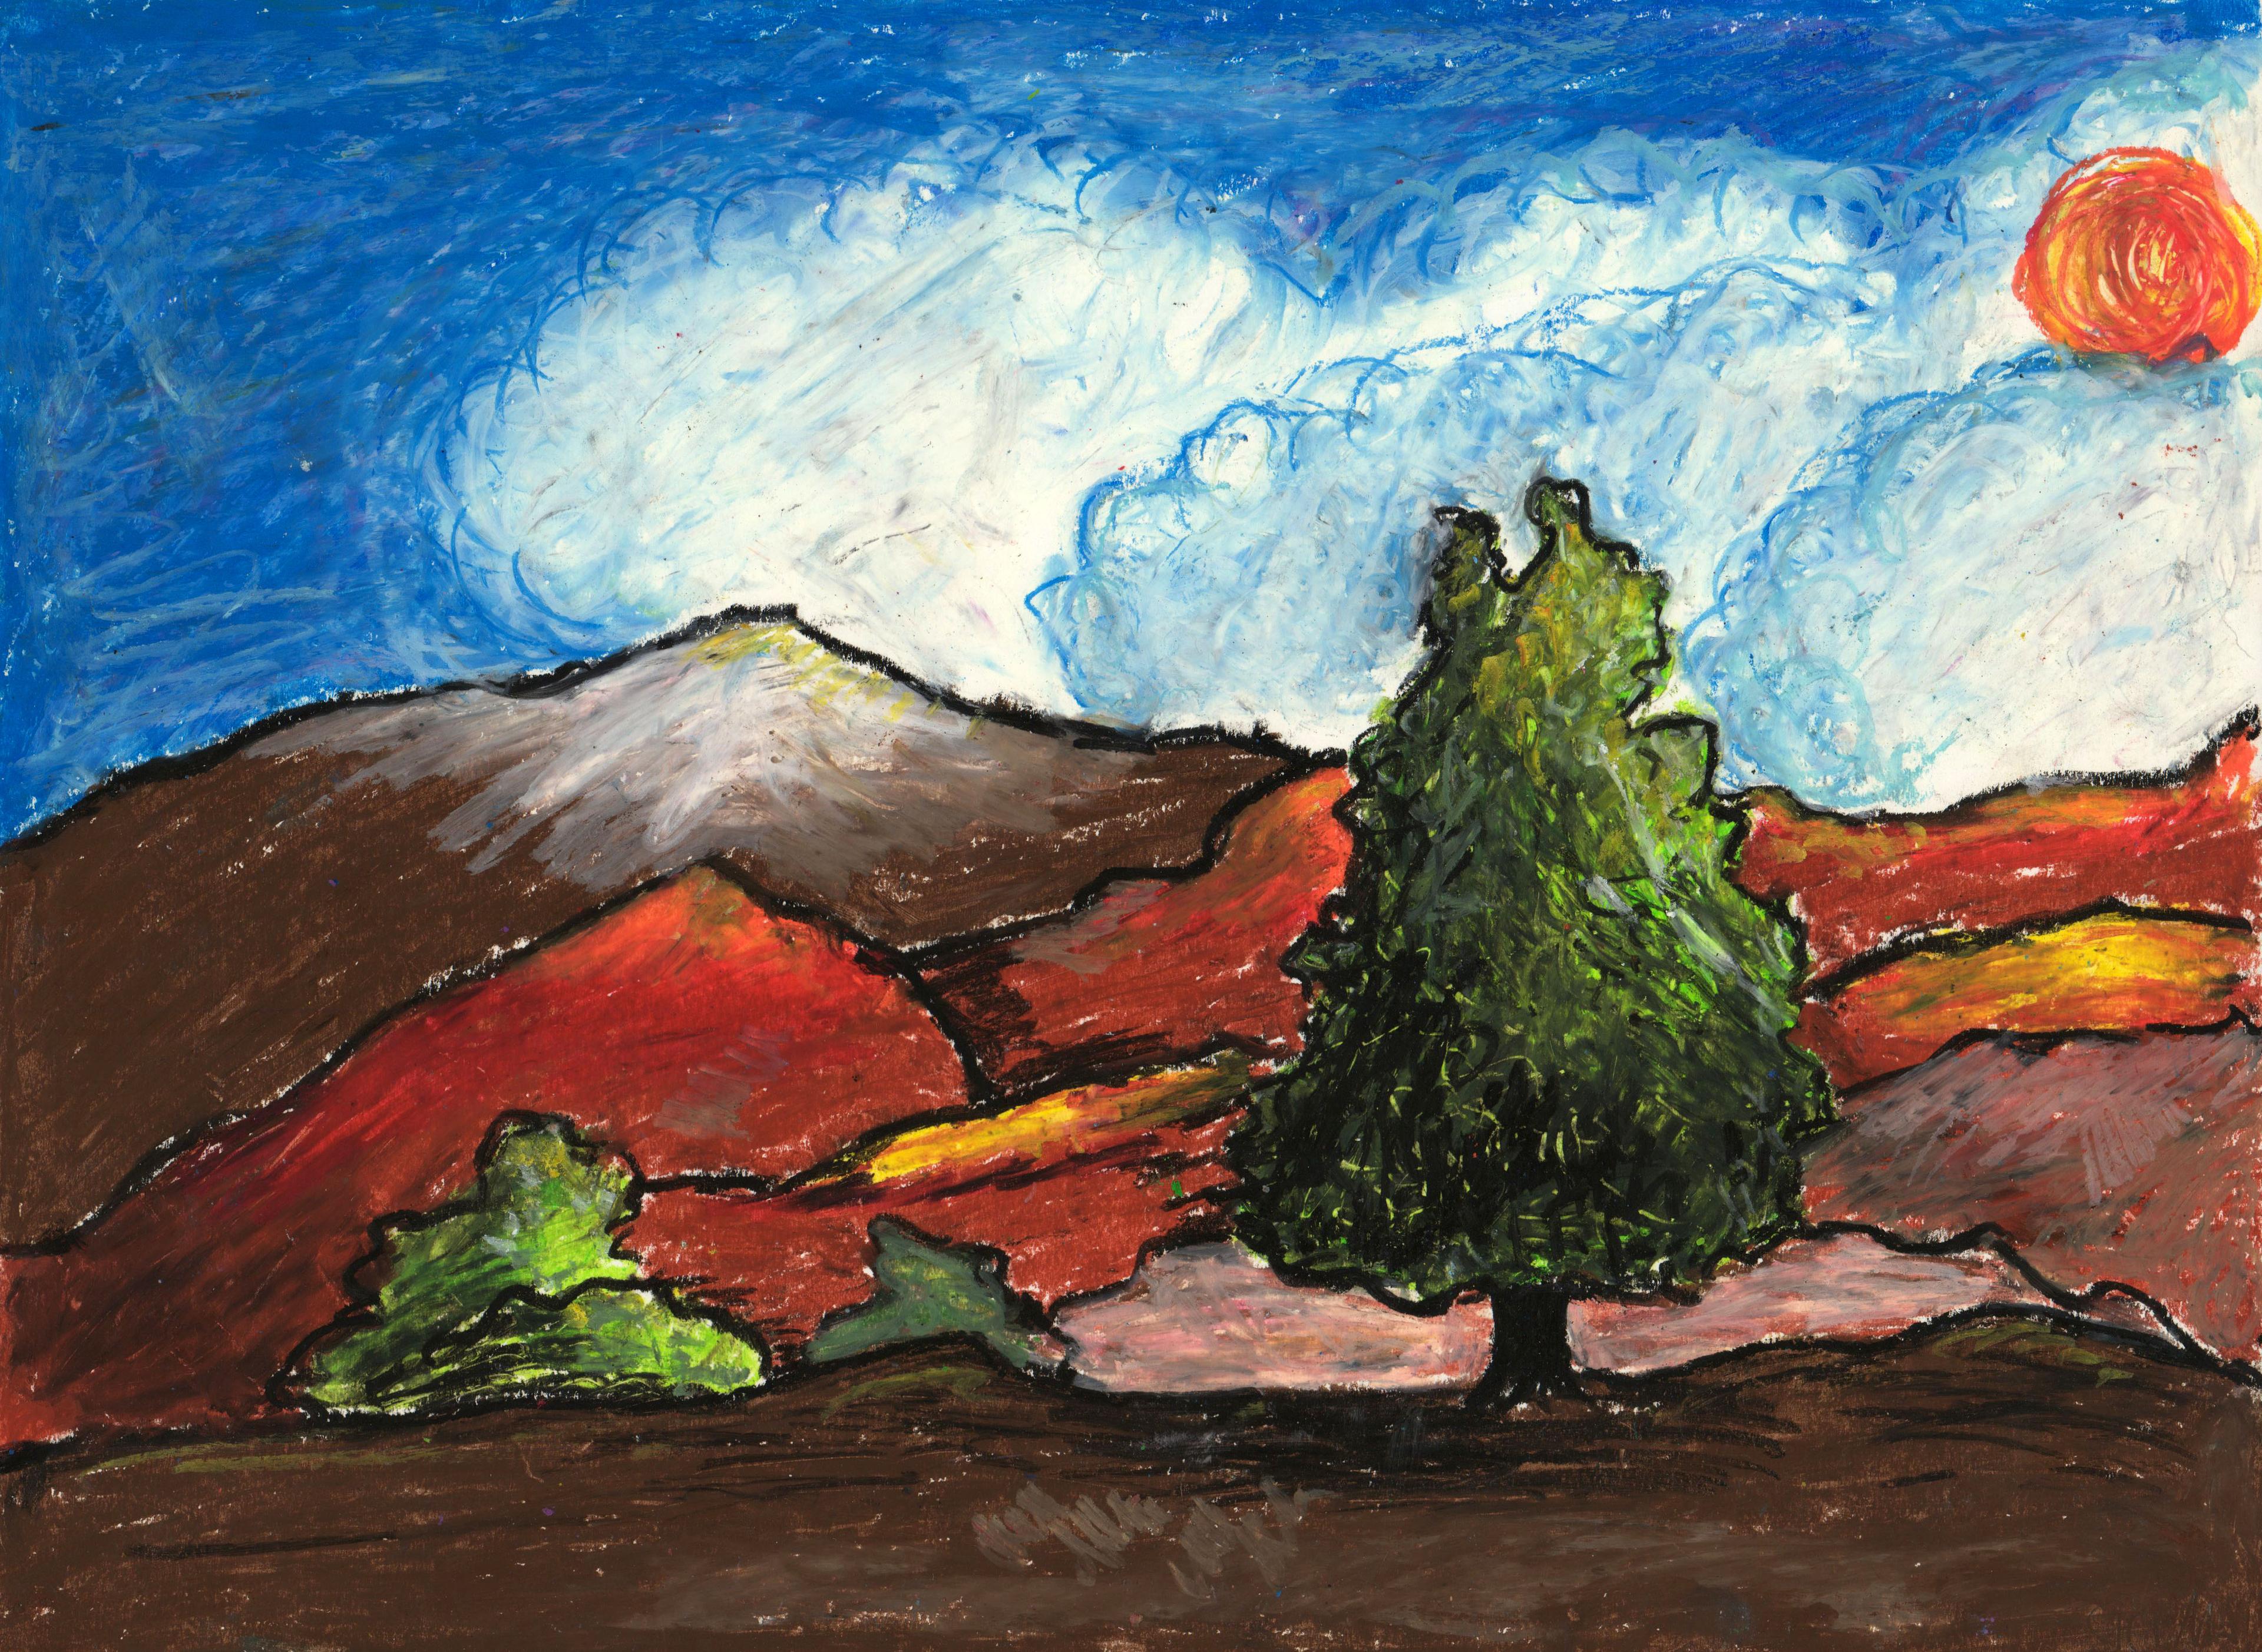 Oil pastel–and–colored pencil drawing of a tall green tree perched in the foreground on brown soil, with a small pair of green bushes to the left. The brown soil changes to red hills in the background, and then becomes a gently sloping brown mountain on the horizon. The blue sky is mostly filled with large white clouds, and a deep orange sun emerges from the clouds near the top right of the illustration.